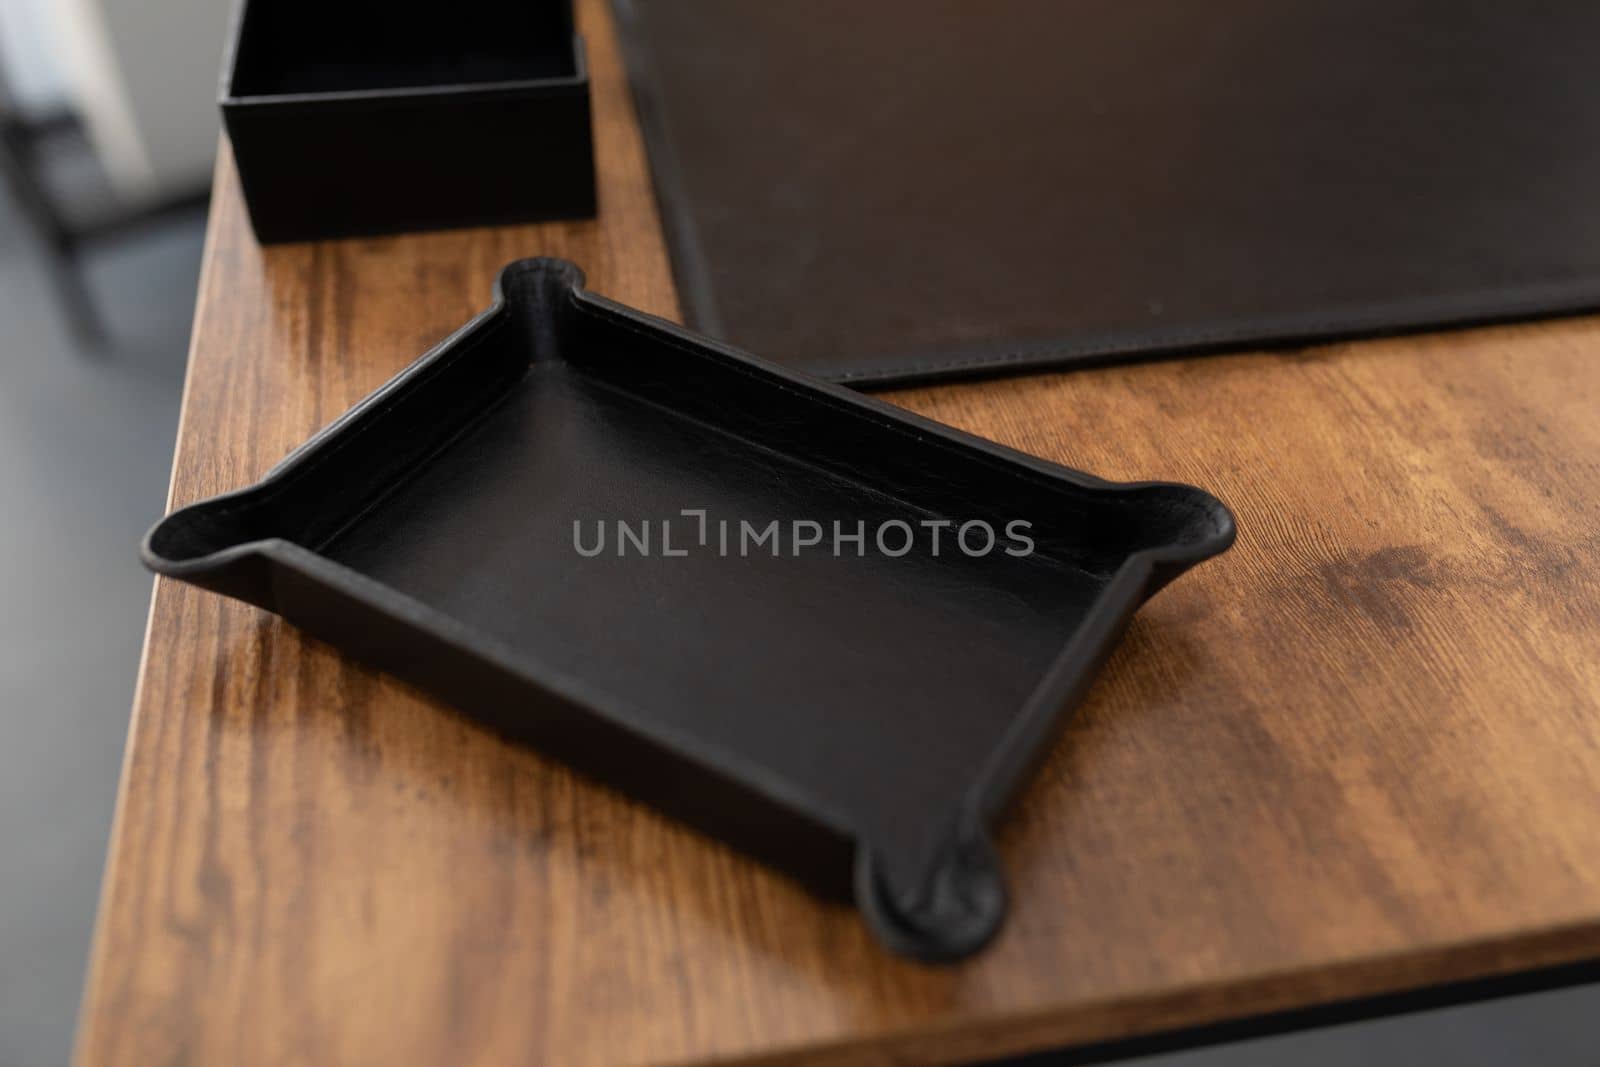 accessories for stationery made of leather on the desktop by TRMK